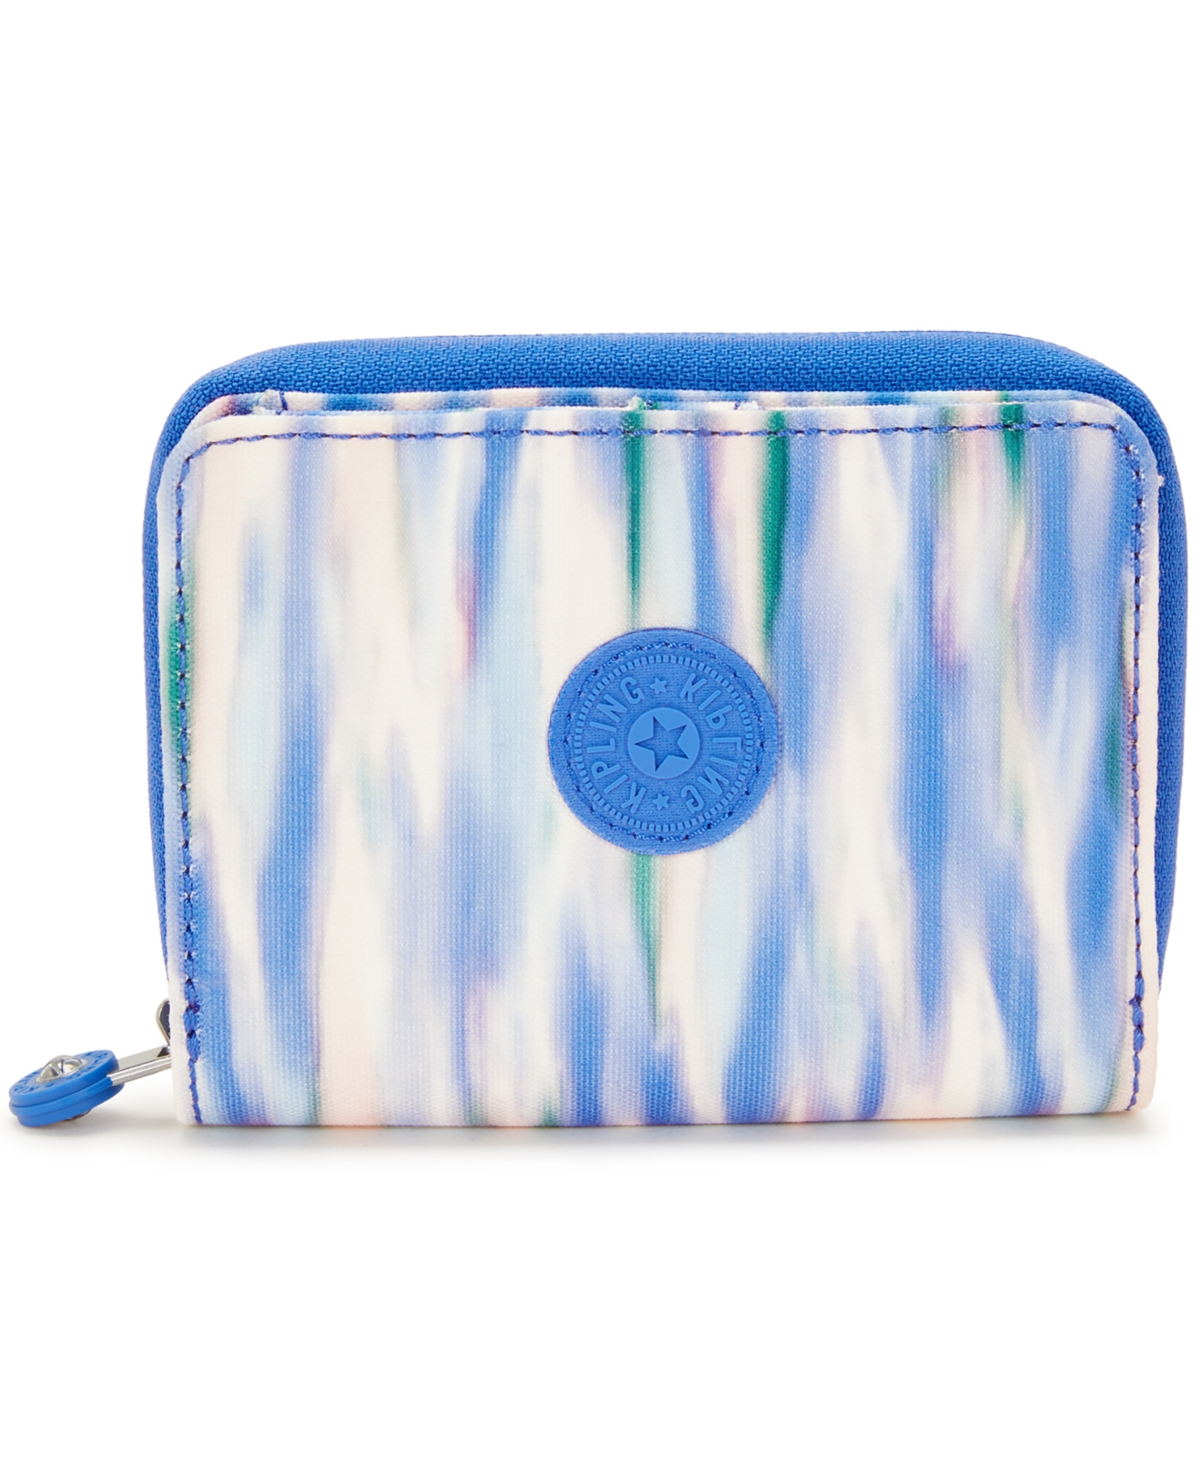 Money Love Nylon Rfid Wallet - Diluted Blue